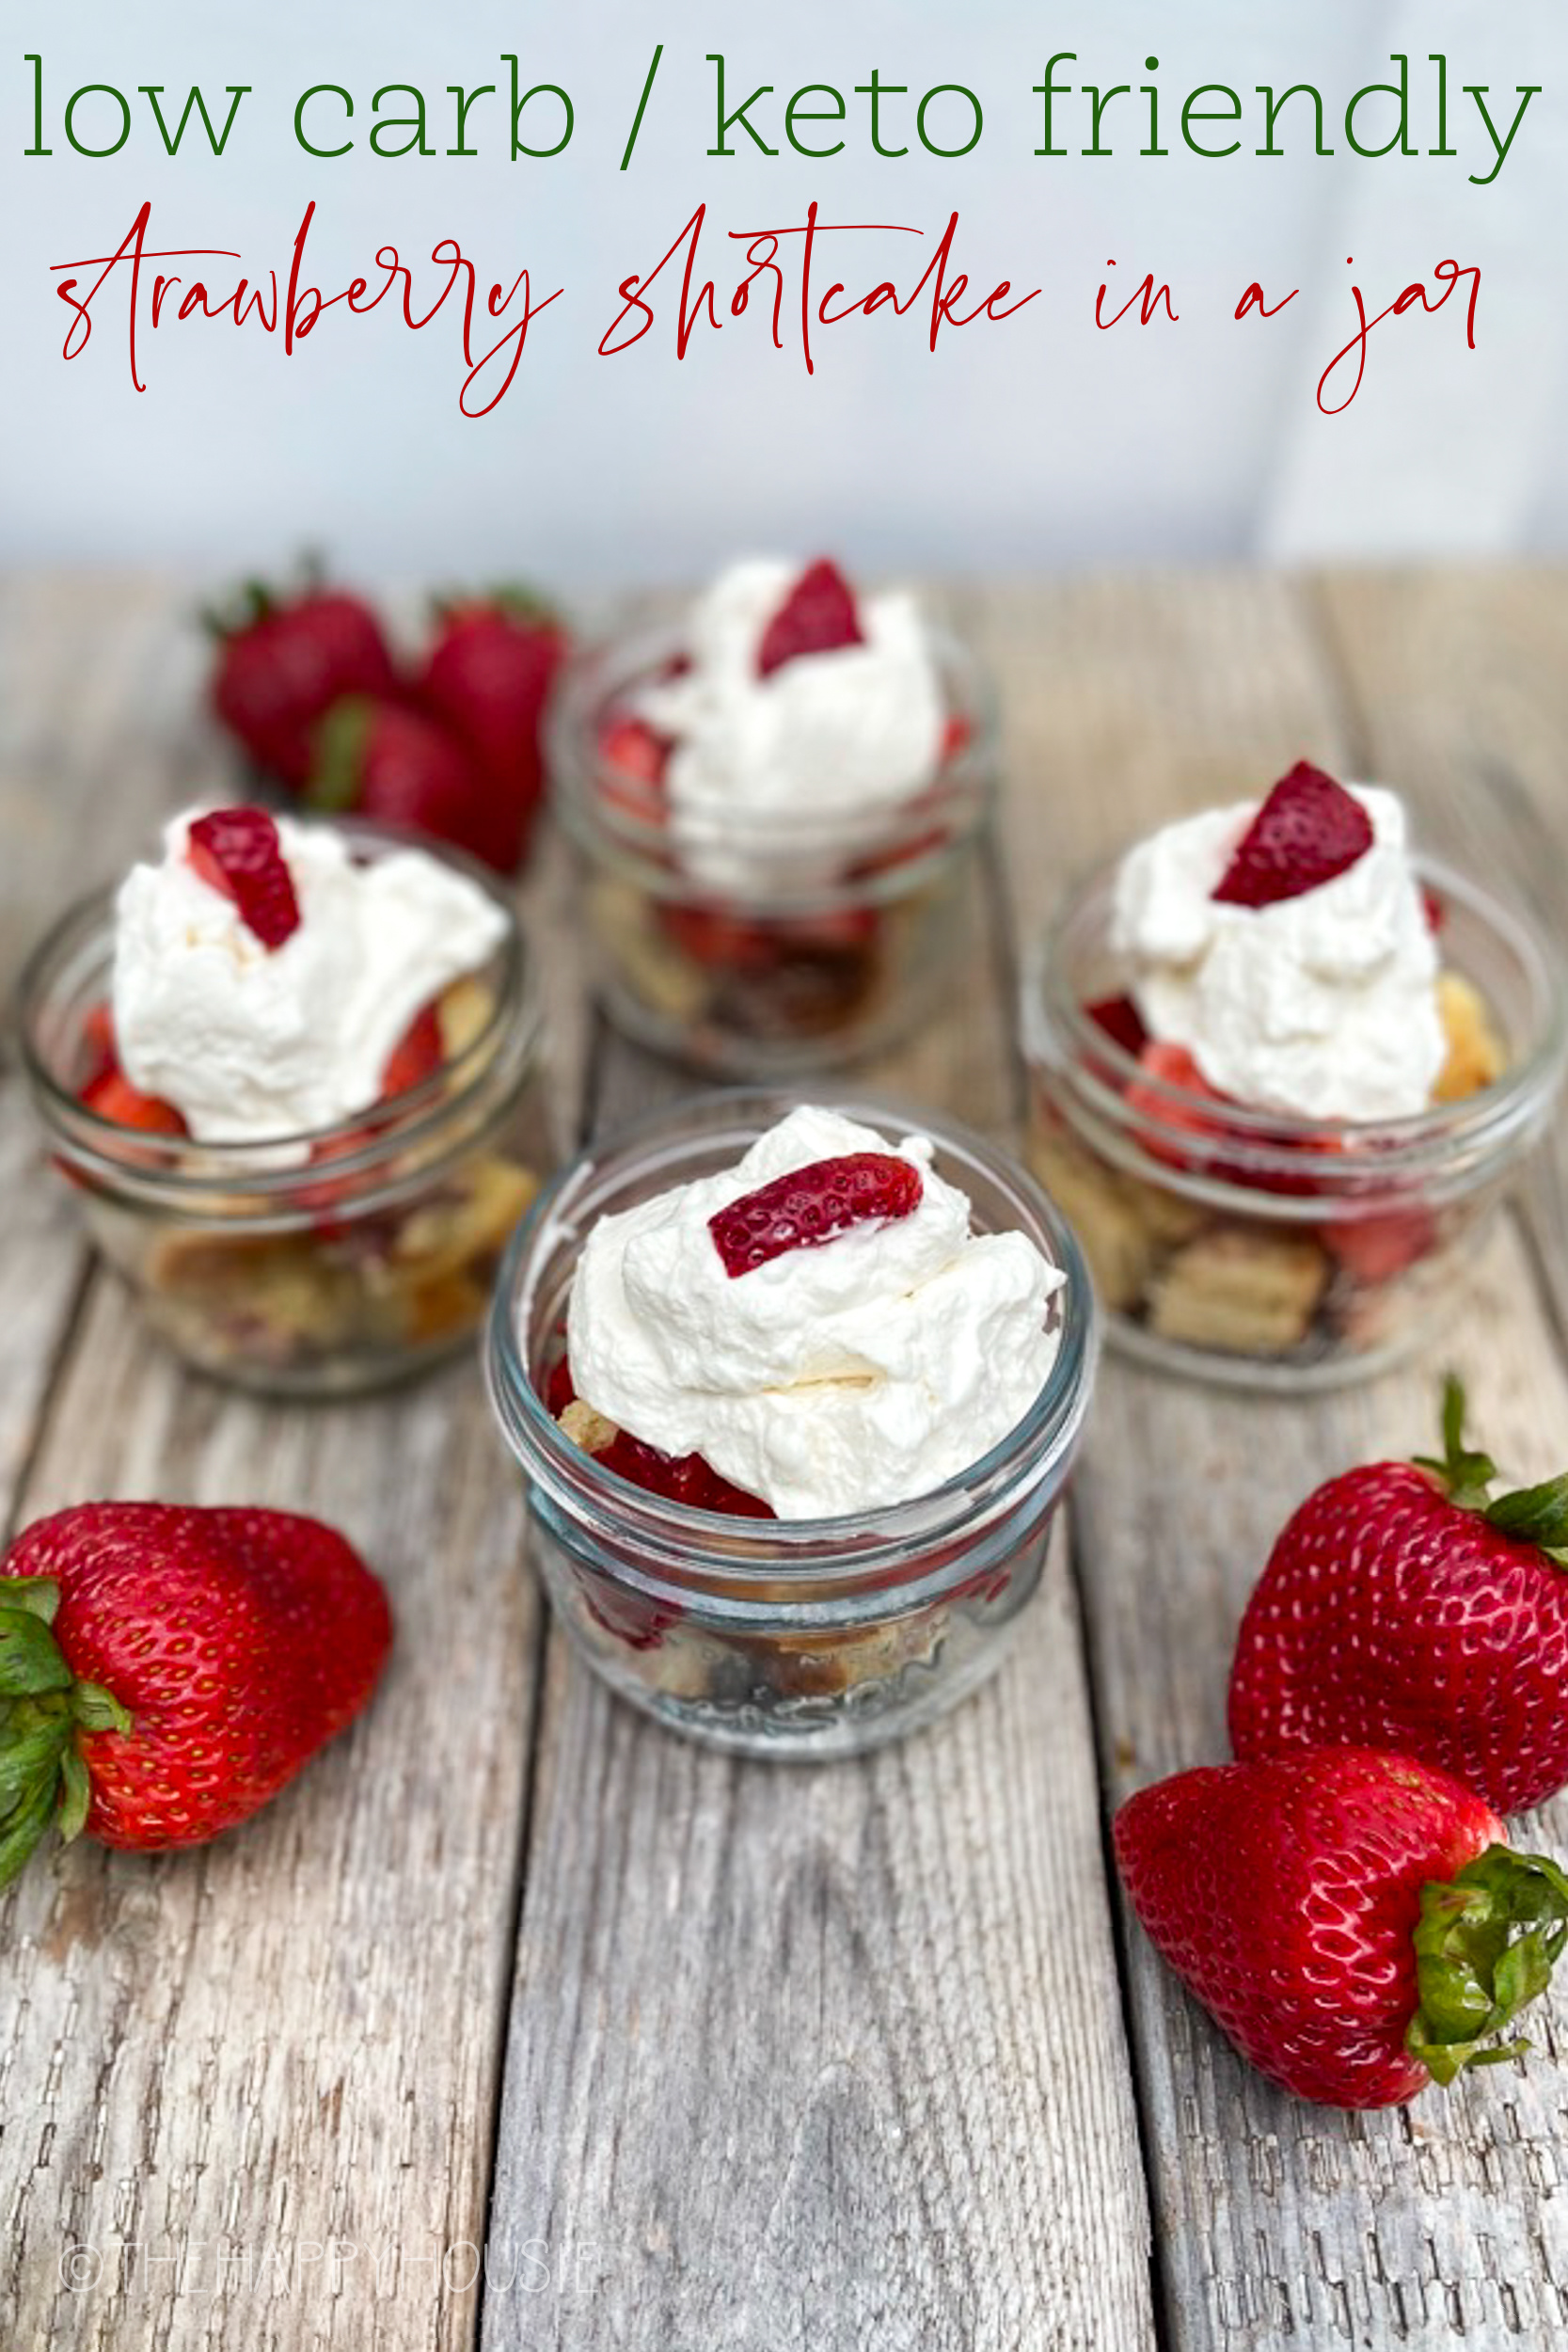 Low carb keto friendly strawberry shortcake in a jar poster.